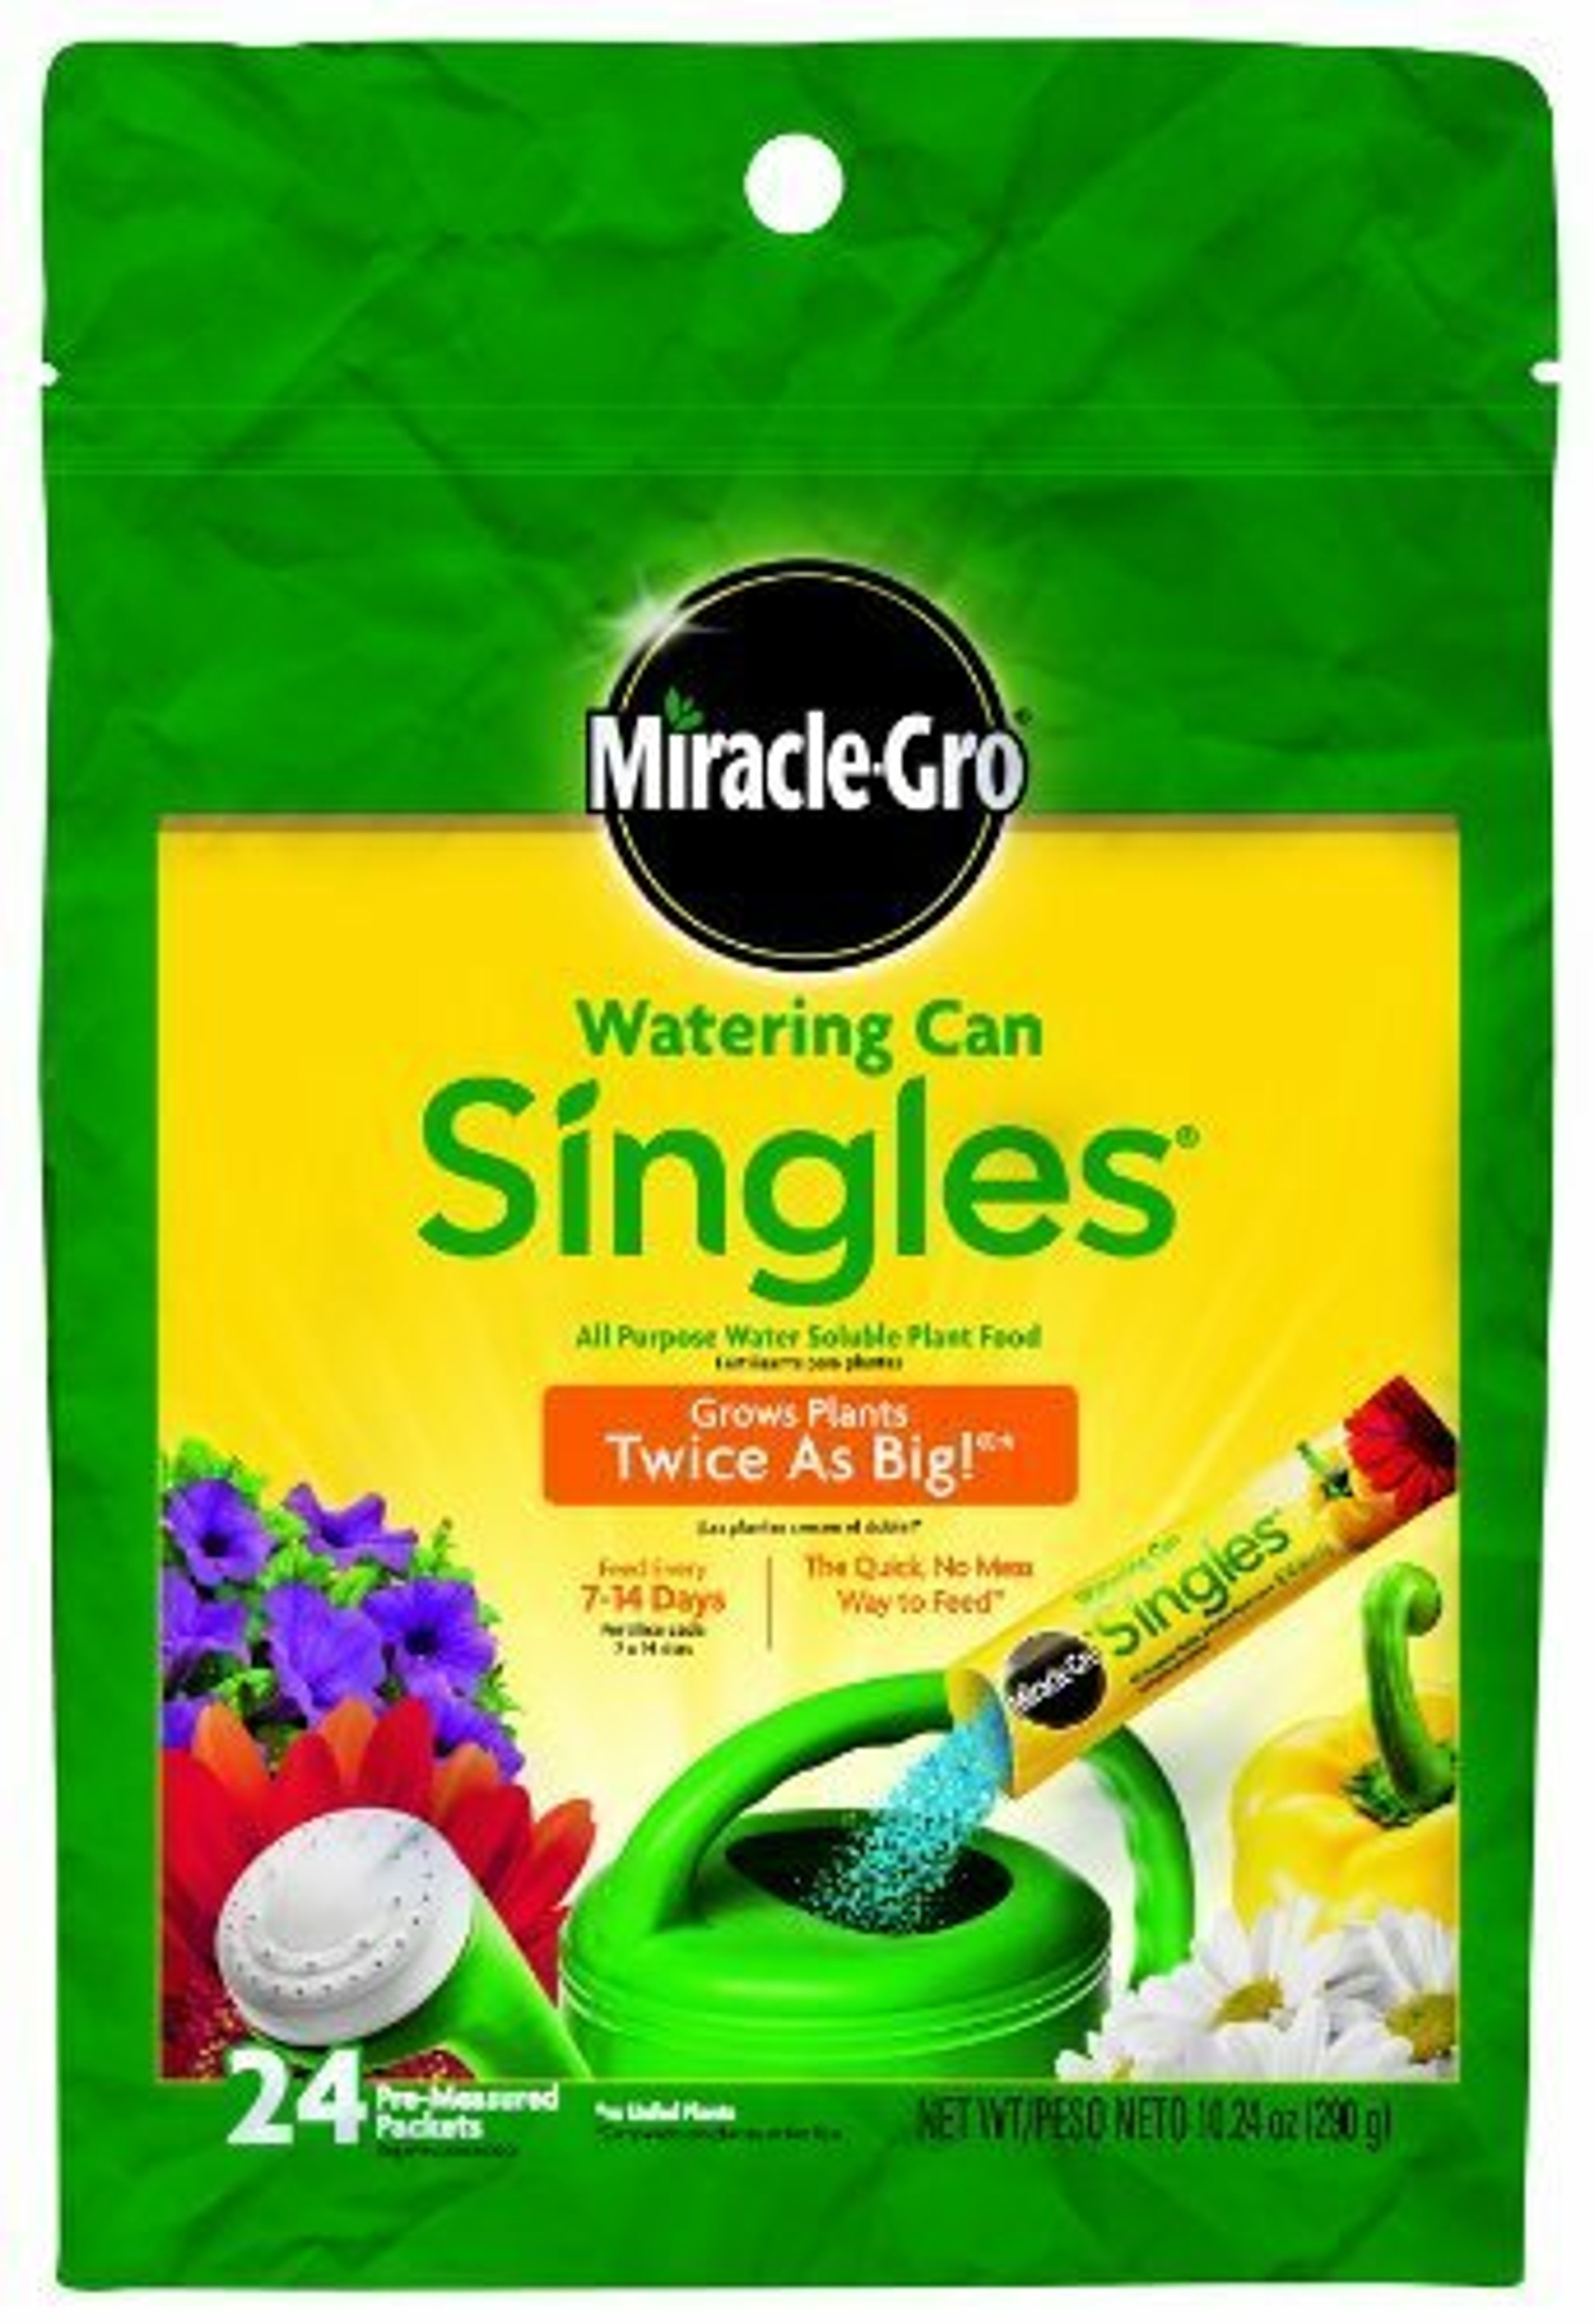 Miracle-Gro Watering Can Singles - Includes 24 Pre-Measured Packets